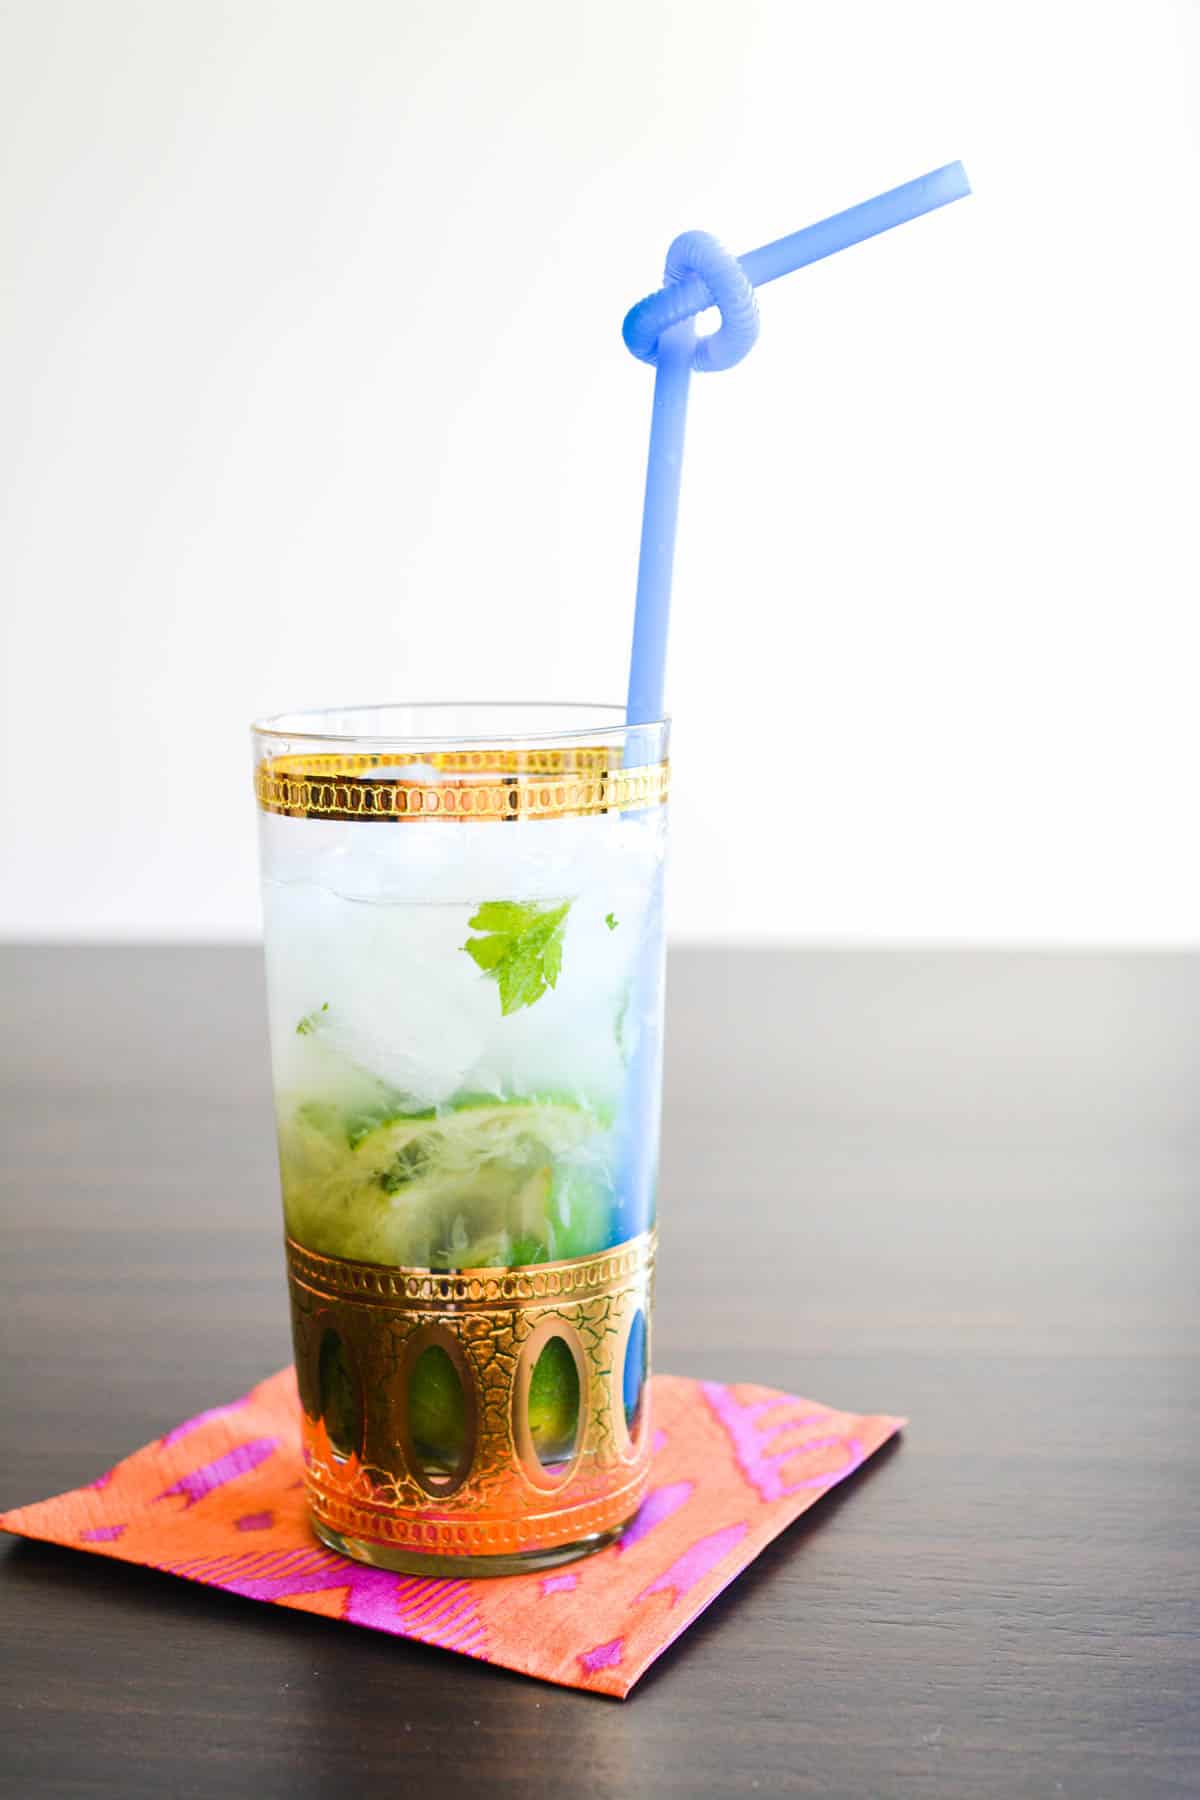 A cocktail glass on a napkin on a table with mint and lime in a clear liquid with blue bendy straw.